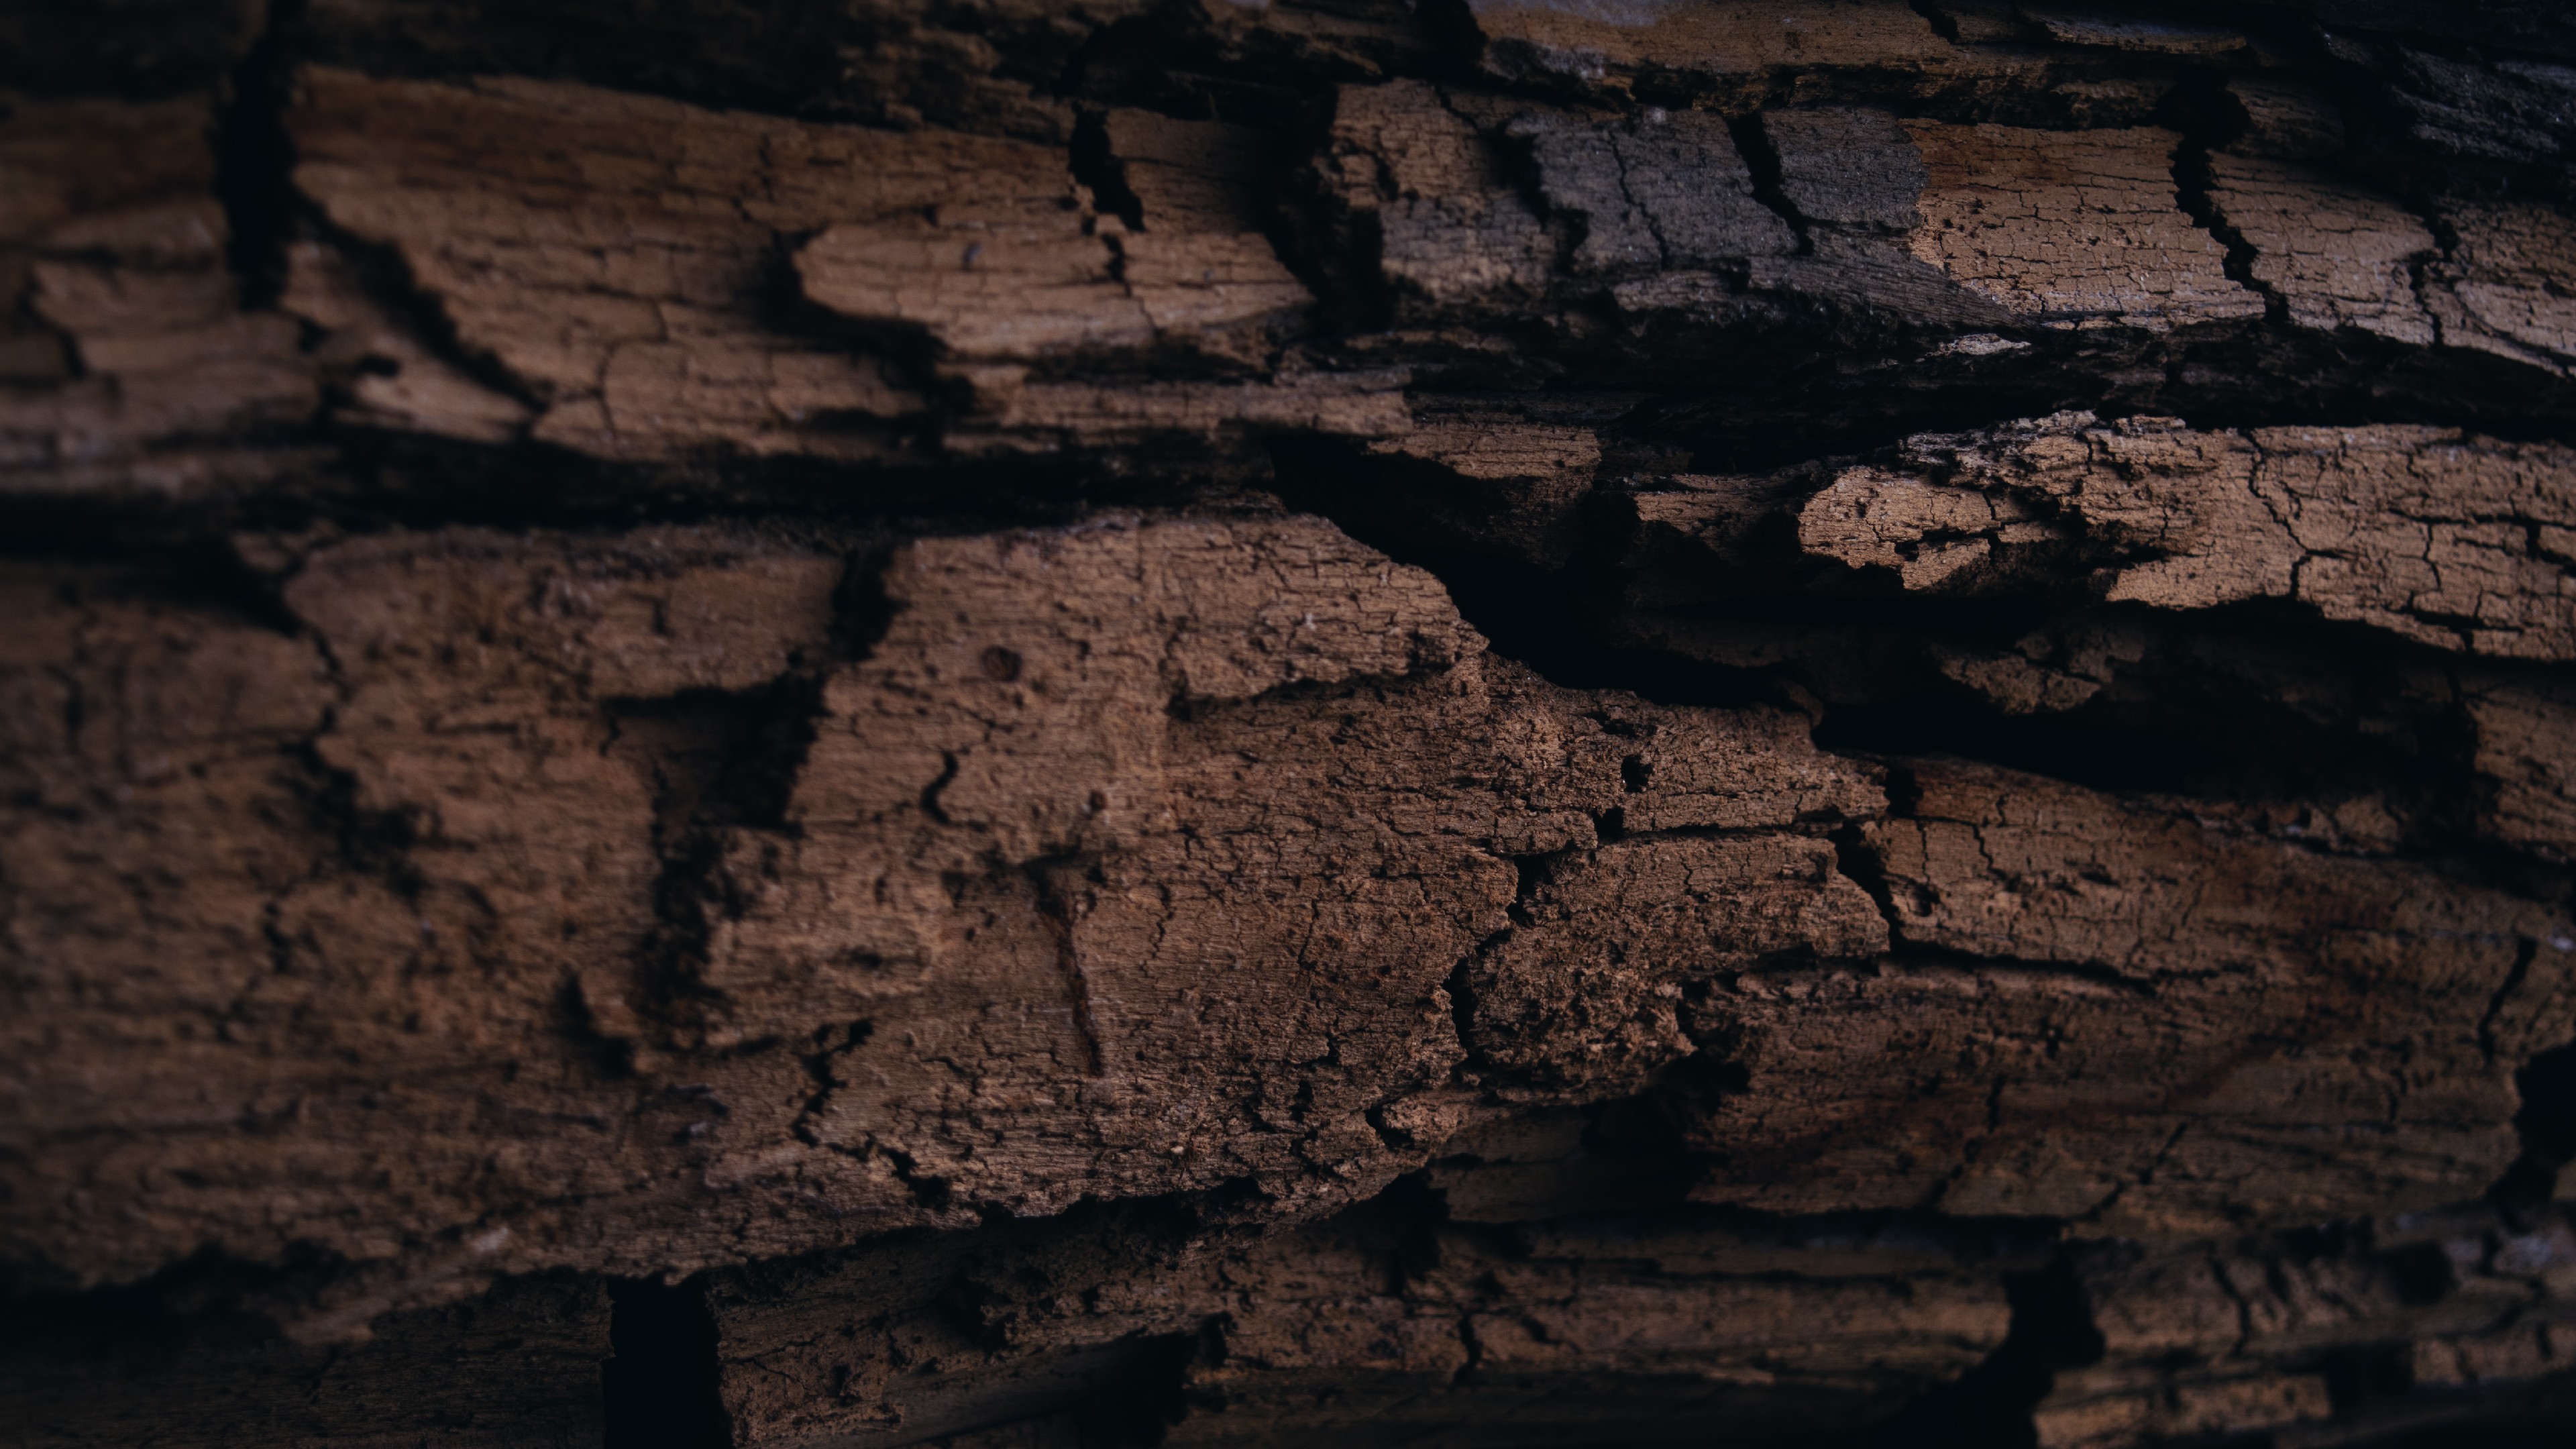 Wallpaper, rock, wall, wood, texture, log, Formation, tree, material, darkness, soil, geology 3840x2160